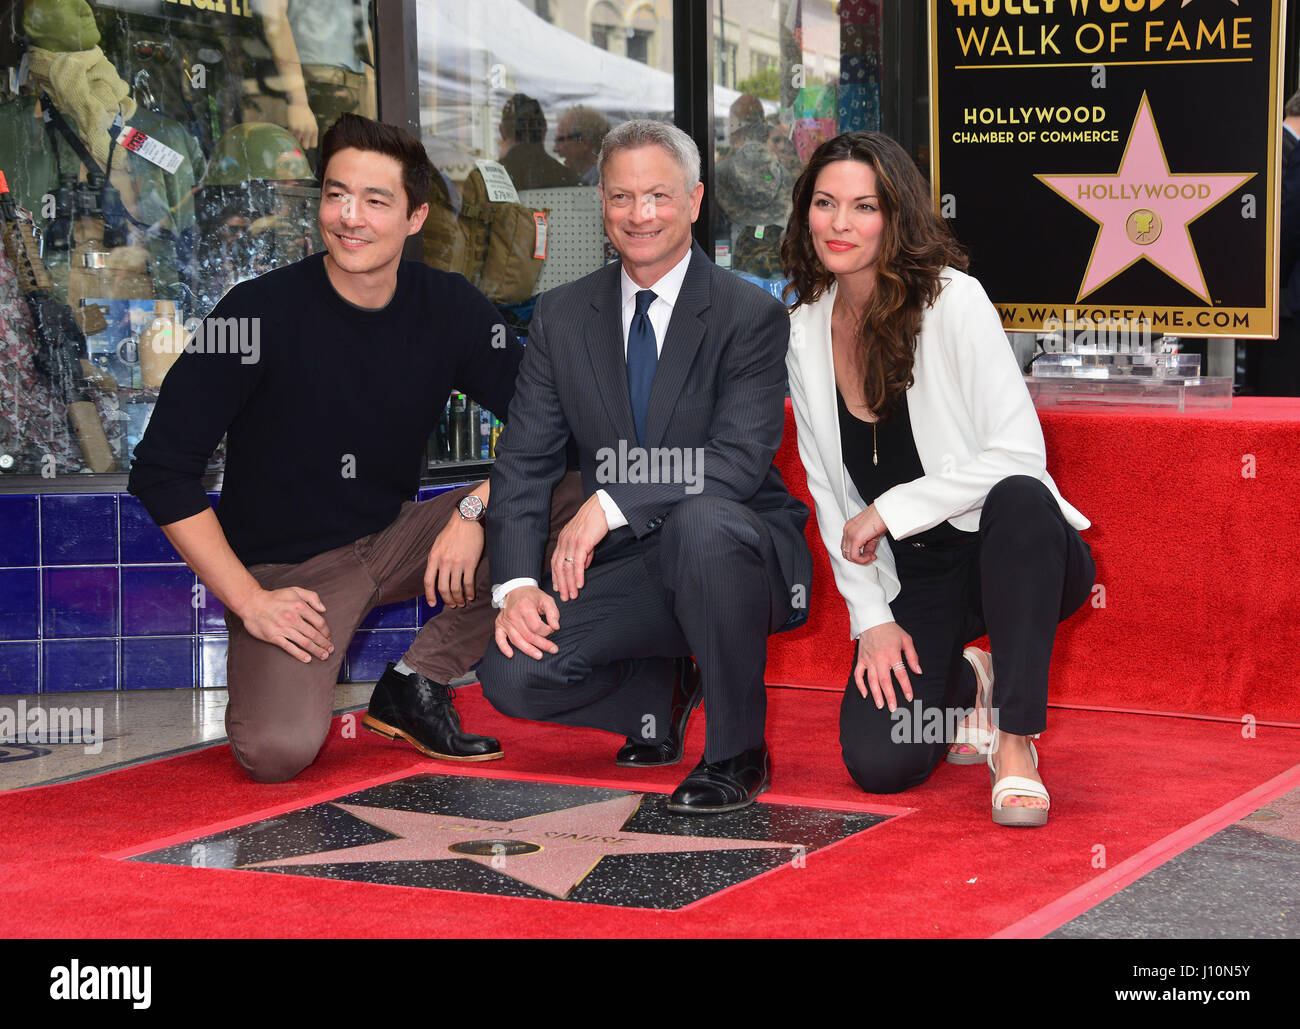 Los Angeles, USA. 17th Apr, 2017. Gary Sinise Star 08 Daniel Henney, Alana De La Garza Gary Sinise honoured with a star on the hollywood Walk of Fame in Los Angeles. April 17, 2017. Credit: Tsuni/USA/Alamy Live News Stock Photo